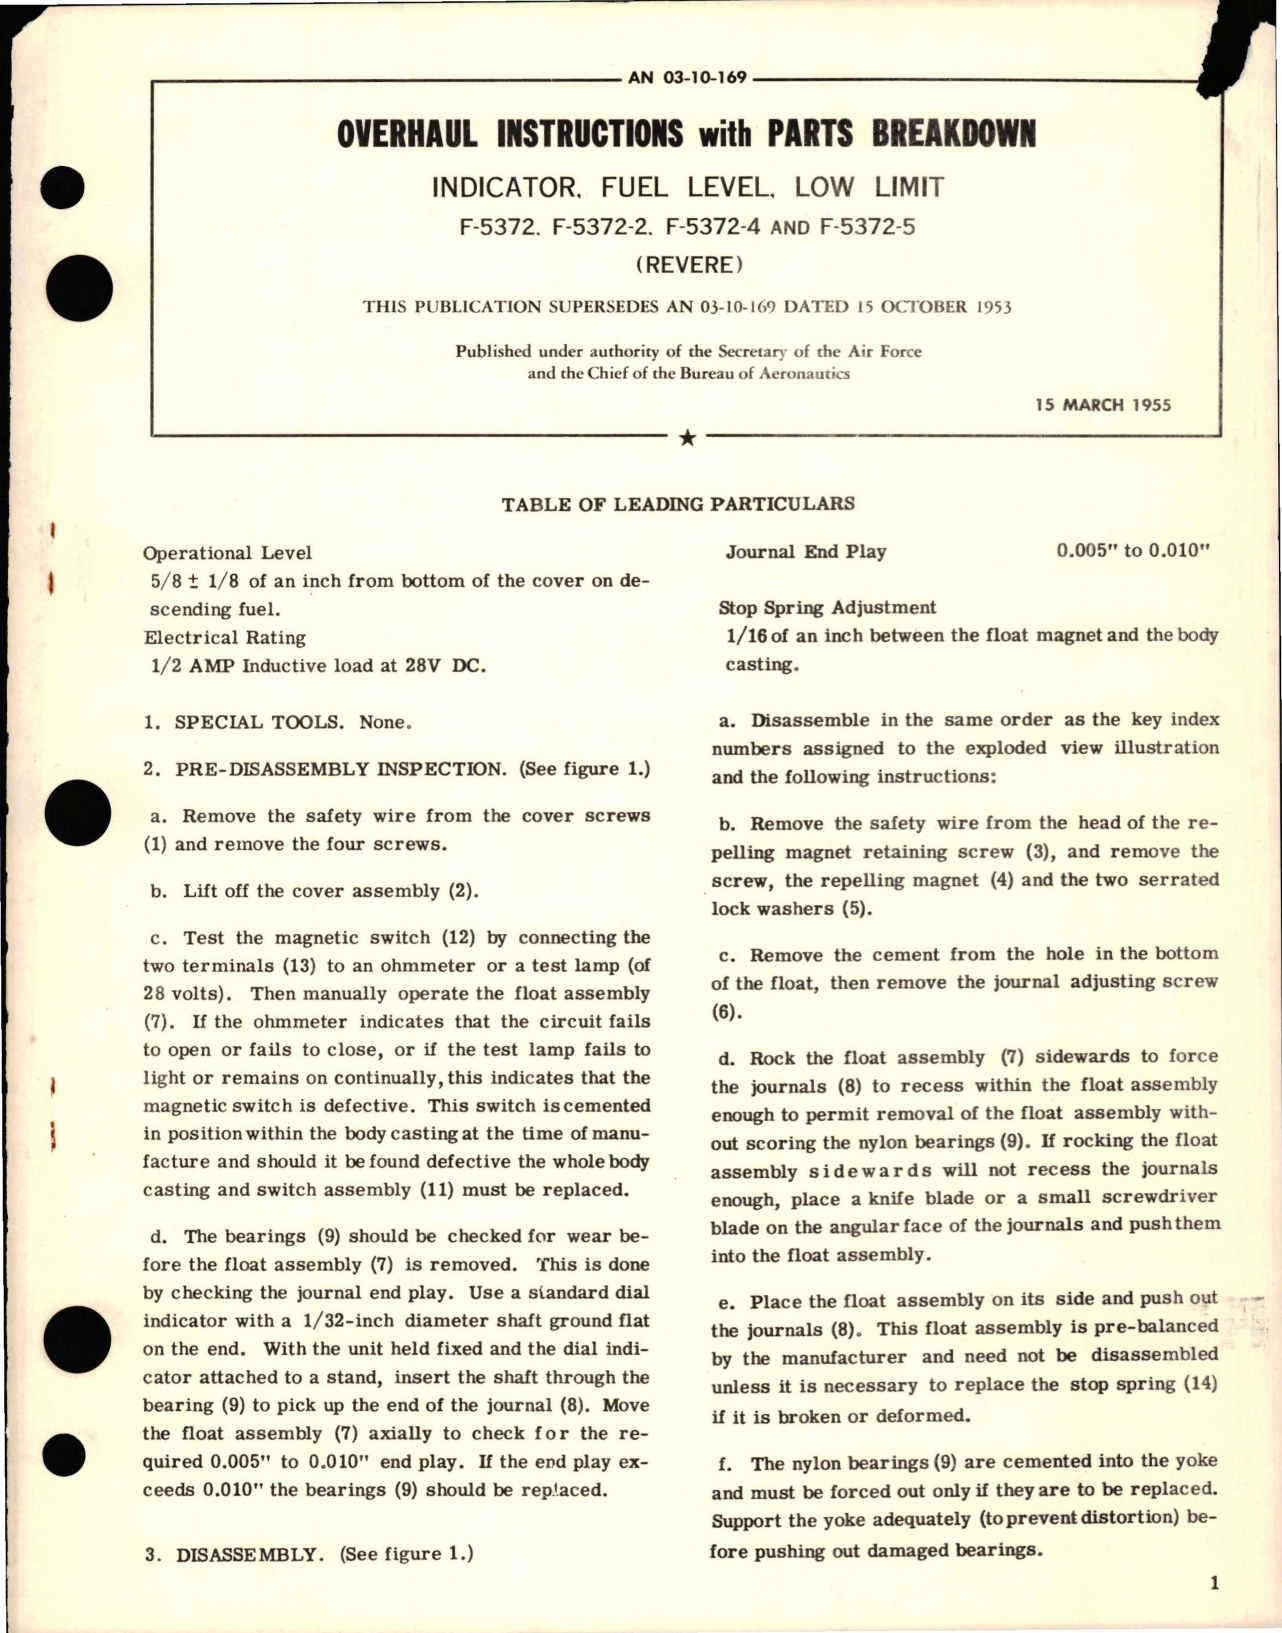 Sample page 1 from AirCorps Library document: Overhaul Instructions with Parts Breakdown for Low Limit Fuel Level Indicator 